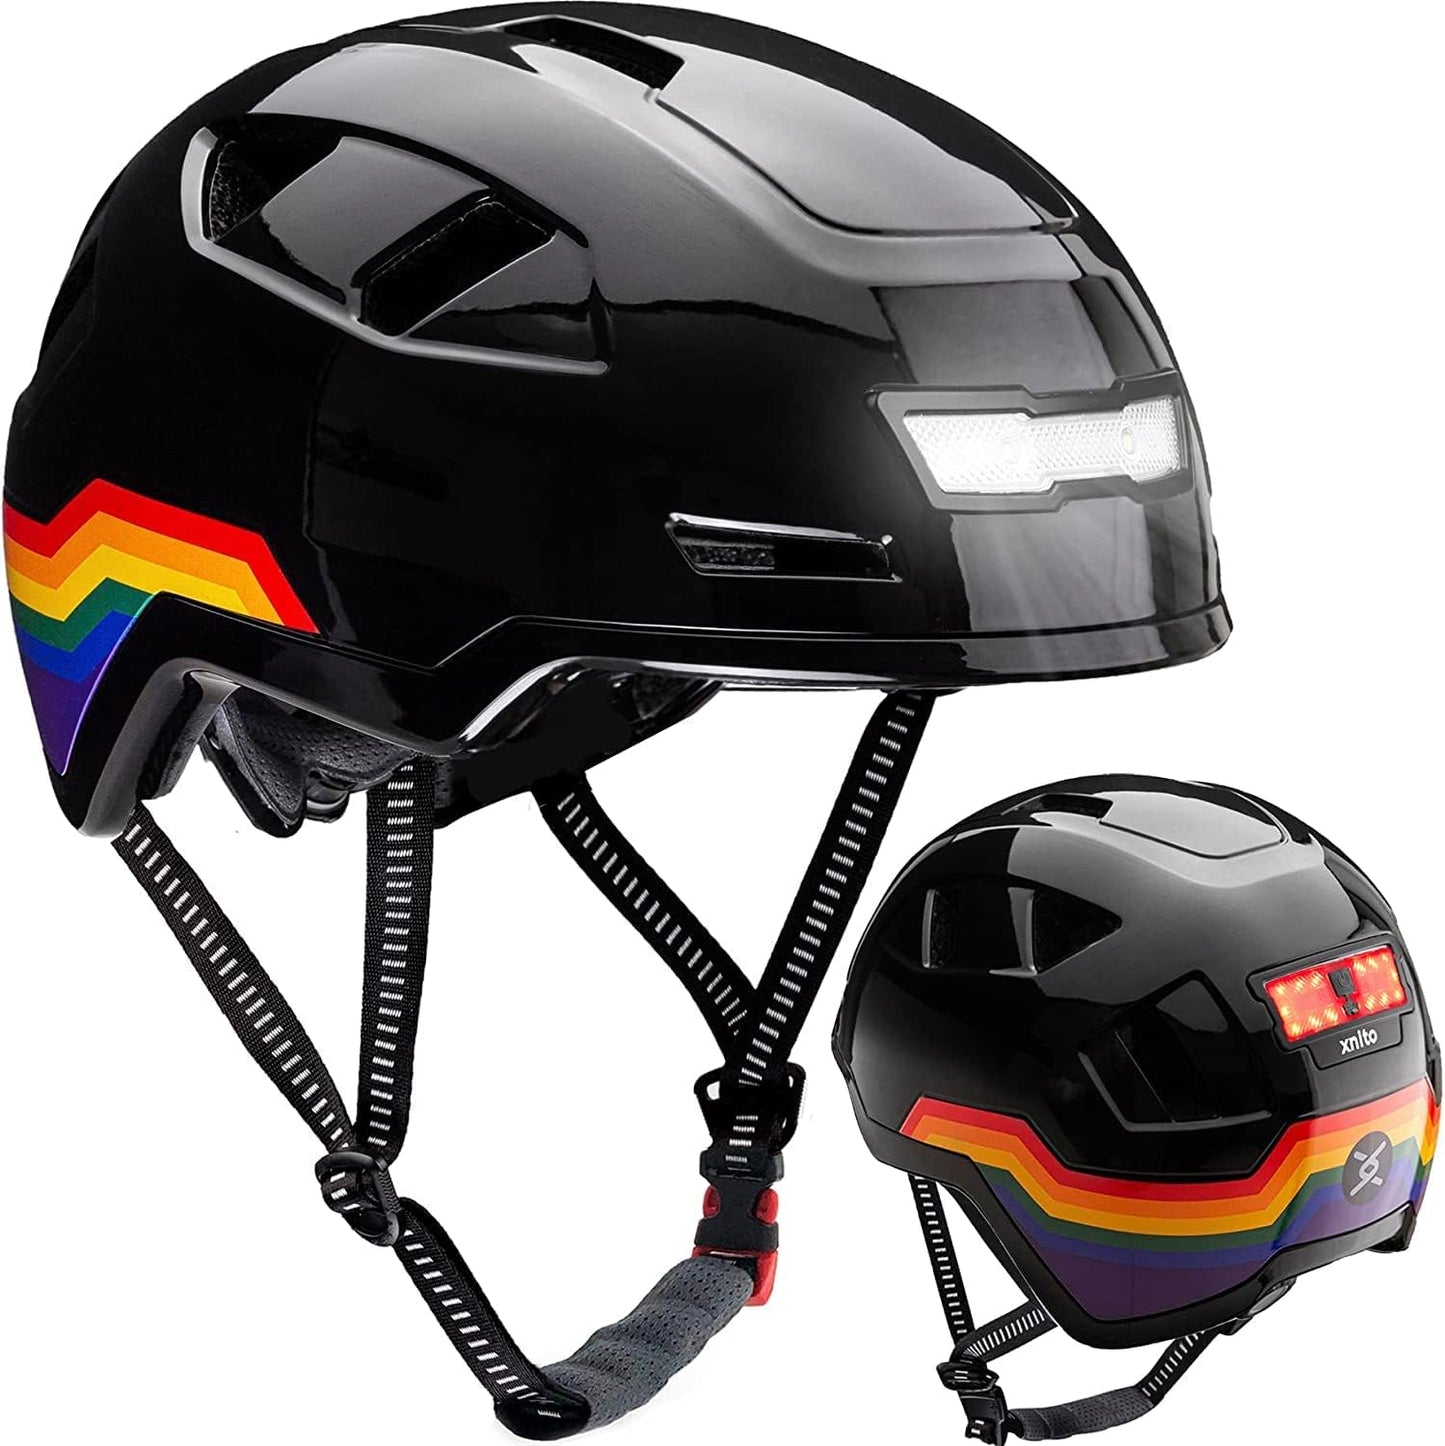 A black Helmet XNITO featuring a rainbow design with LED front and rear lights, CPSC certified, and offering both front and rear views.